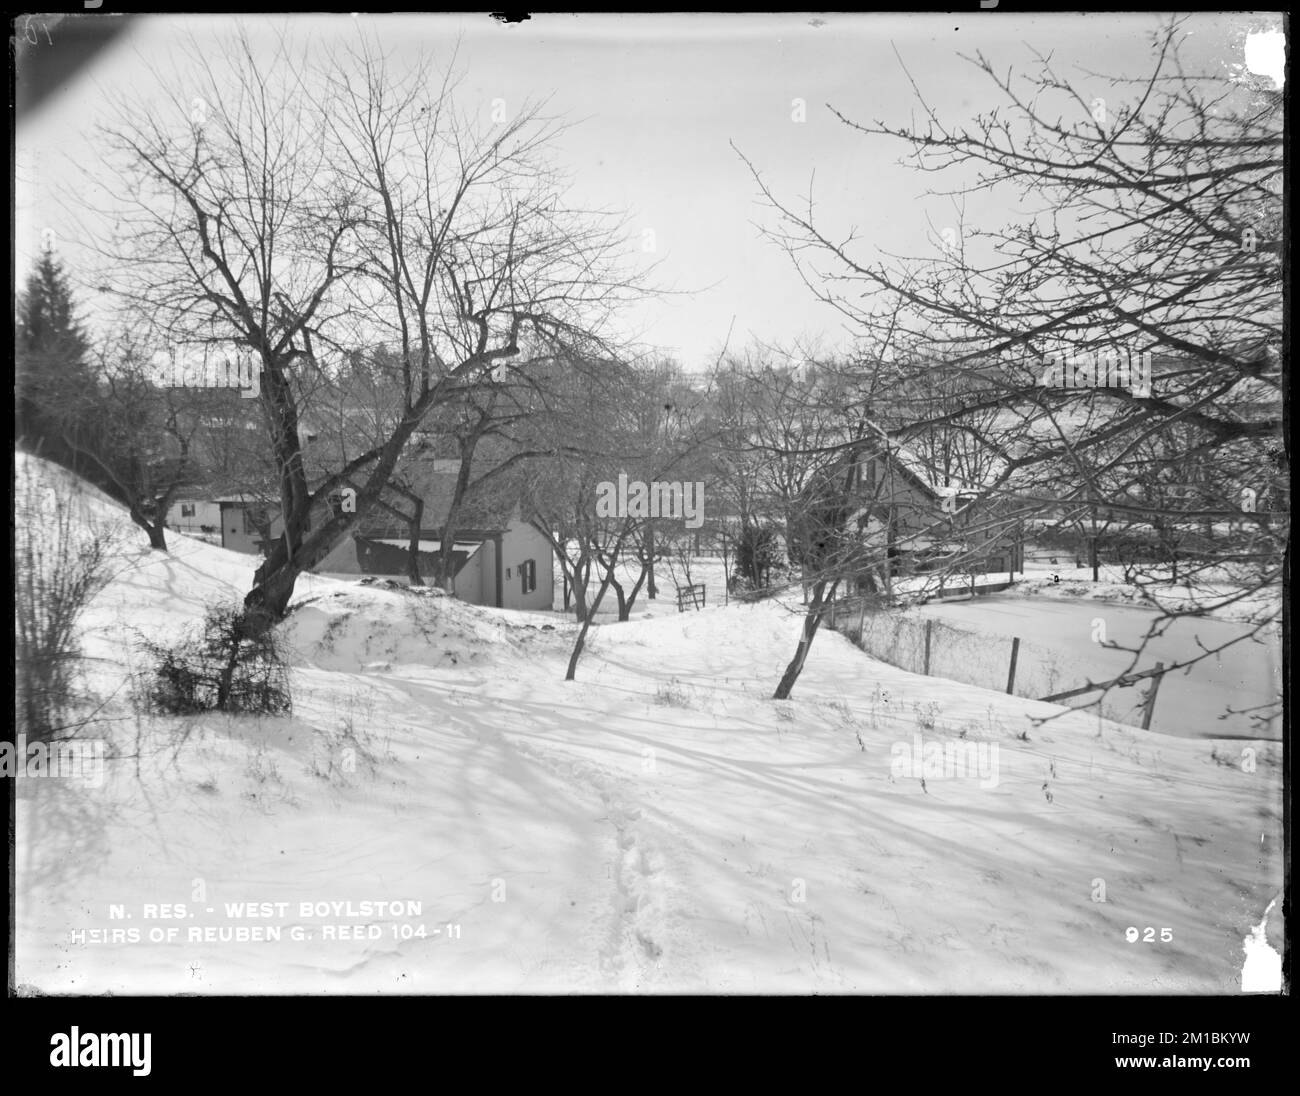 Wachusett Reservoir, Reuben G. Reed's heirs' buildings, on the east side of North Main Street, from the north in orchard back of the buildings, West Boylston, Mass., Dec. 17, 1896 , waterworks, reservoirs water distribution structures, real estate Stock Photo